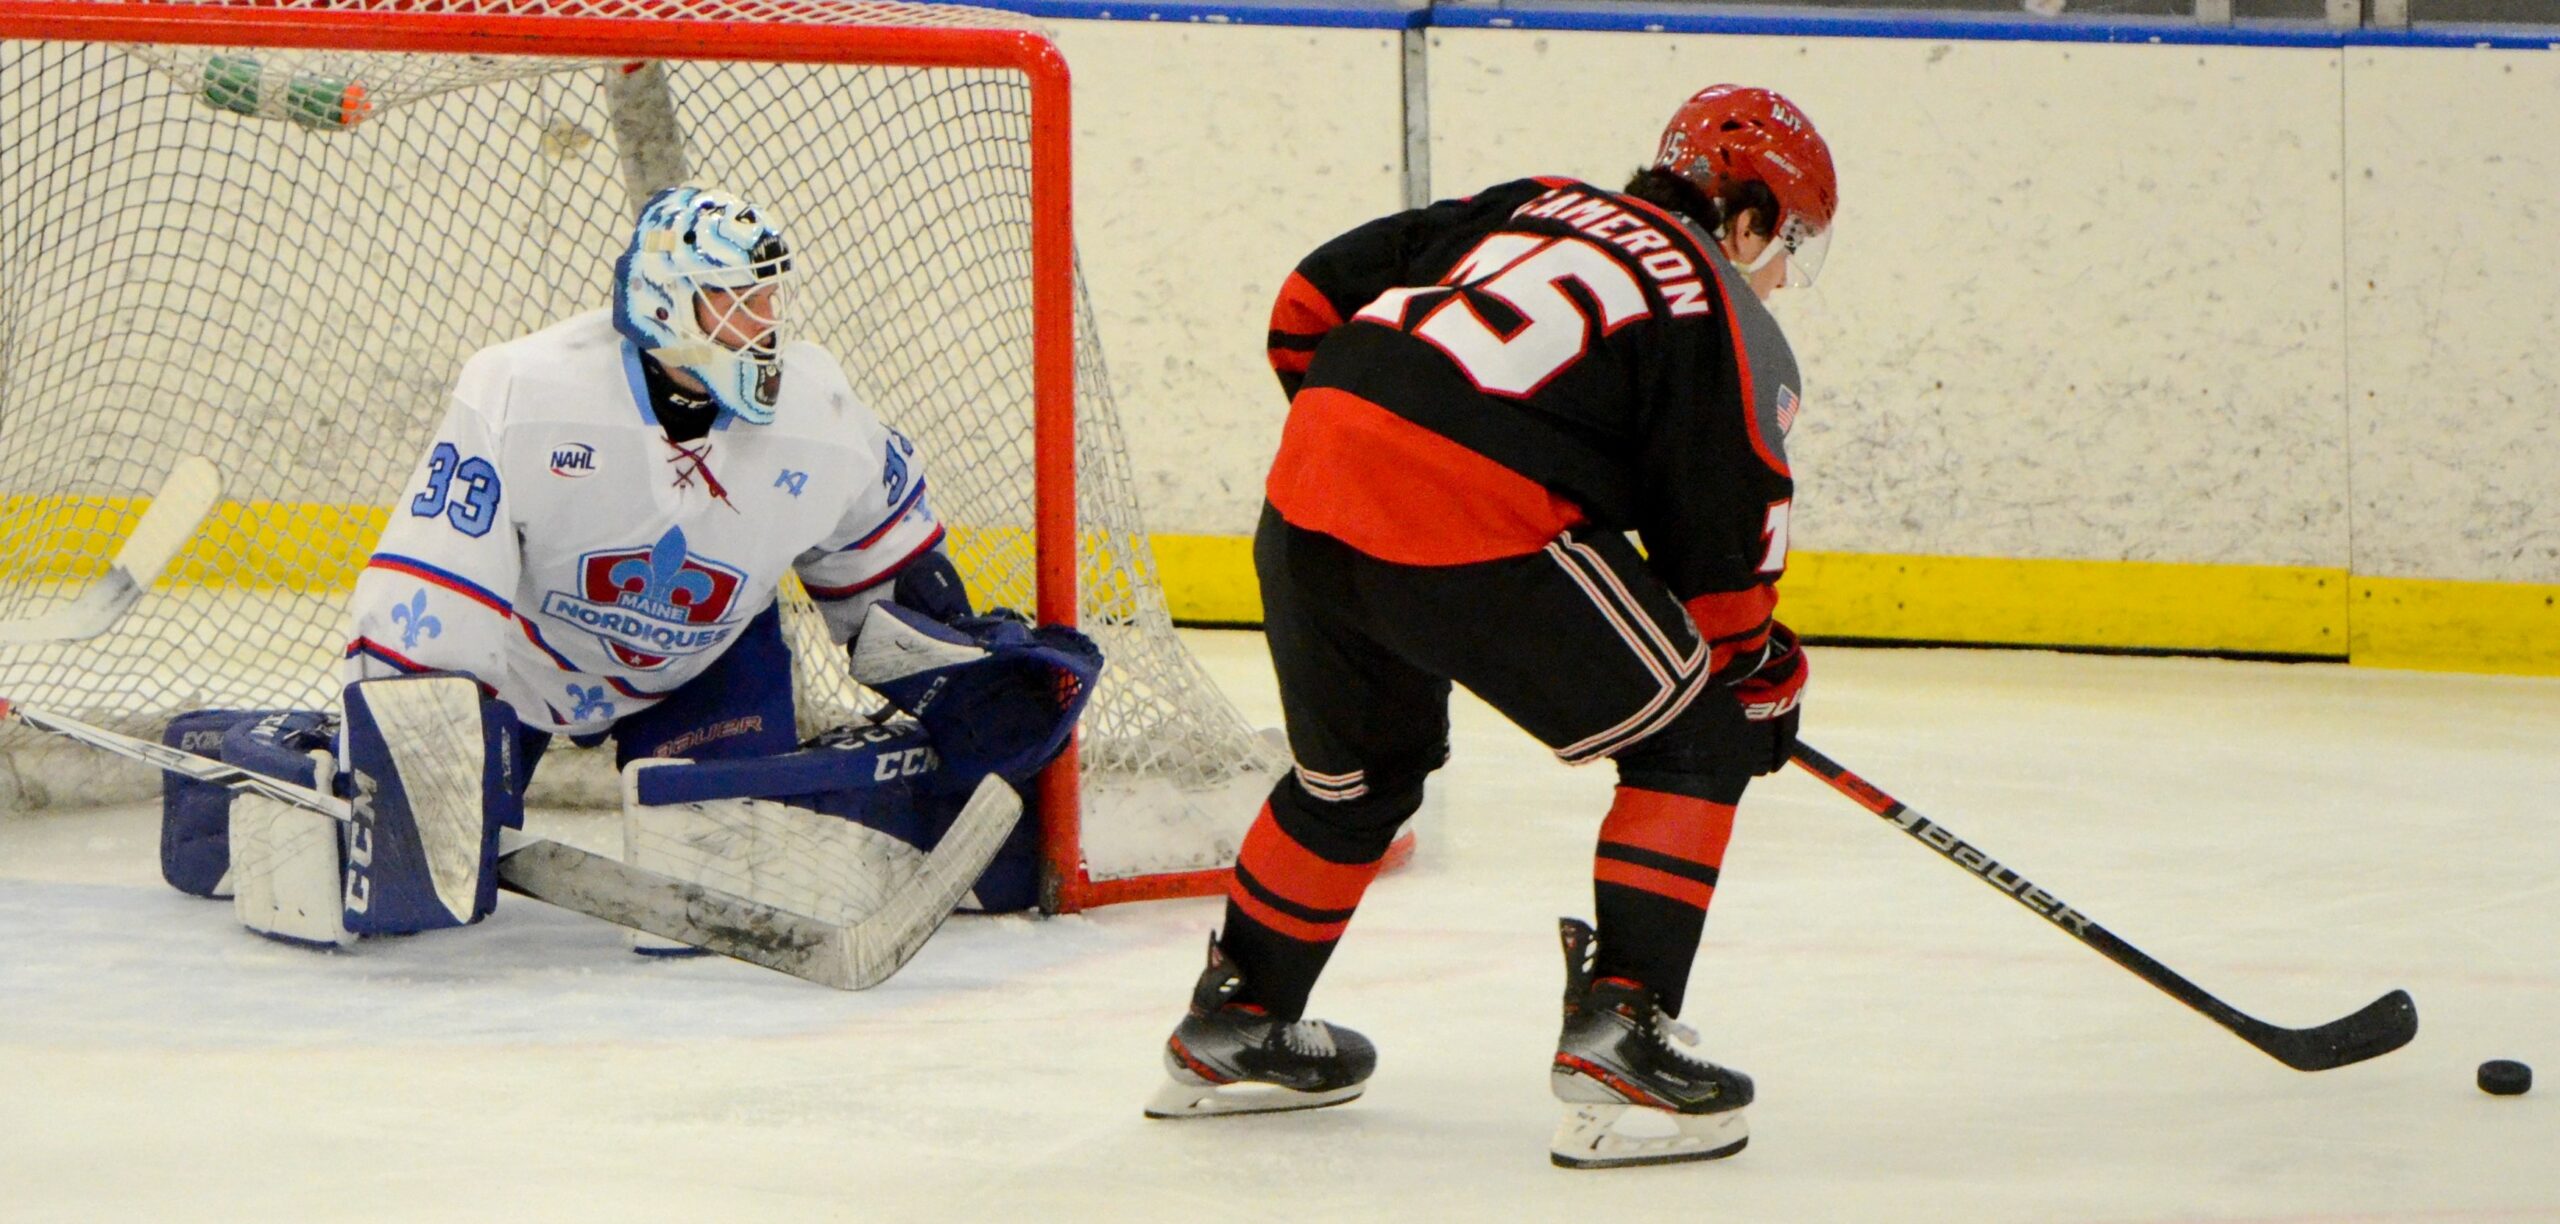 Cameron helps lead Titans to 5 – 2 win over Nordiques